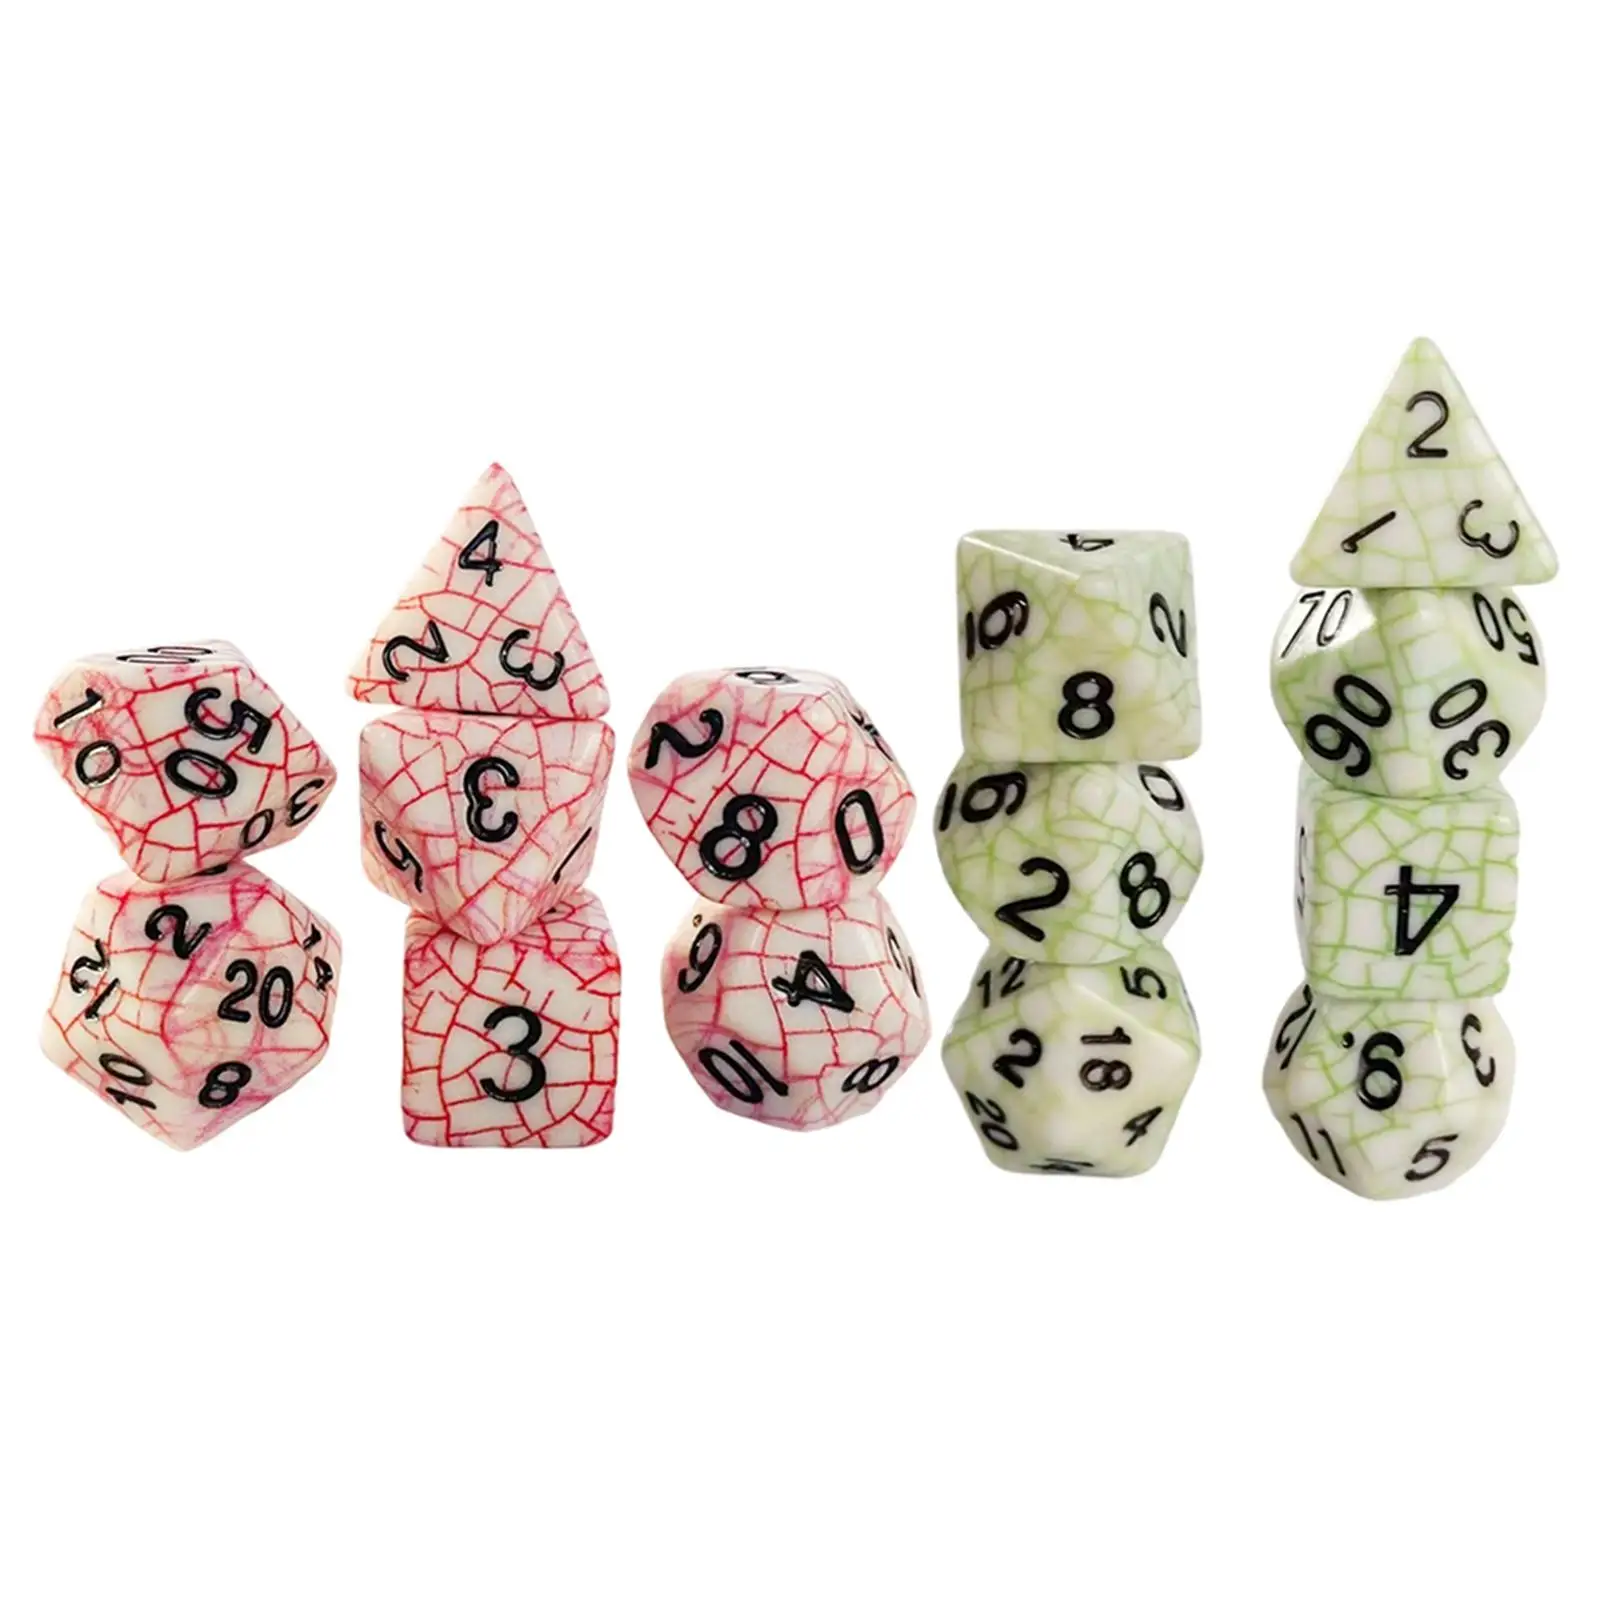 7x Polyhedral Dice, D20 D12 D10 D10% D8 D6 D4, Multi Sided Dice Set, D4-D20 Die for DND RPG MTG Entertainment Roleplaying